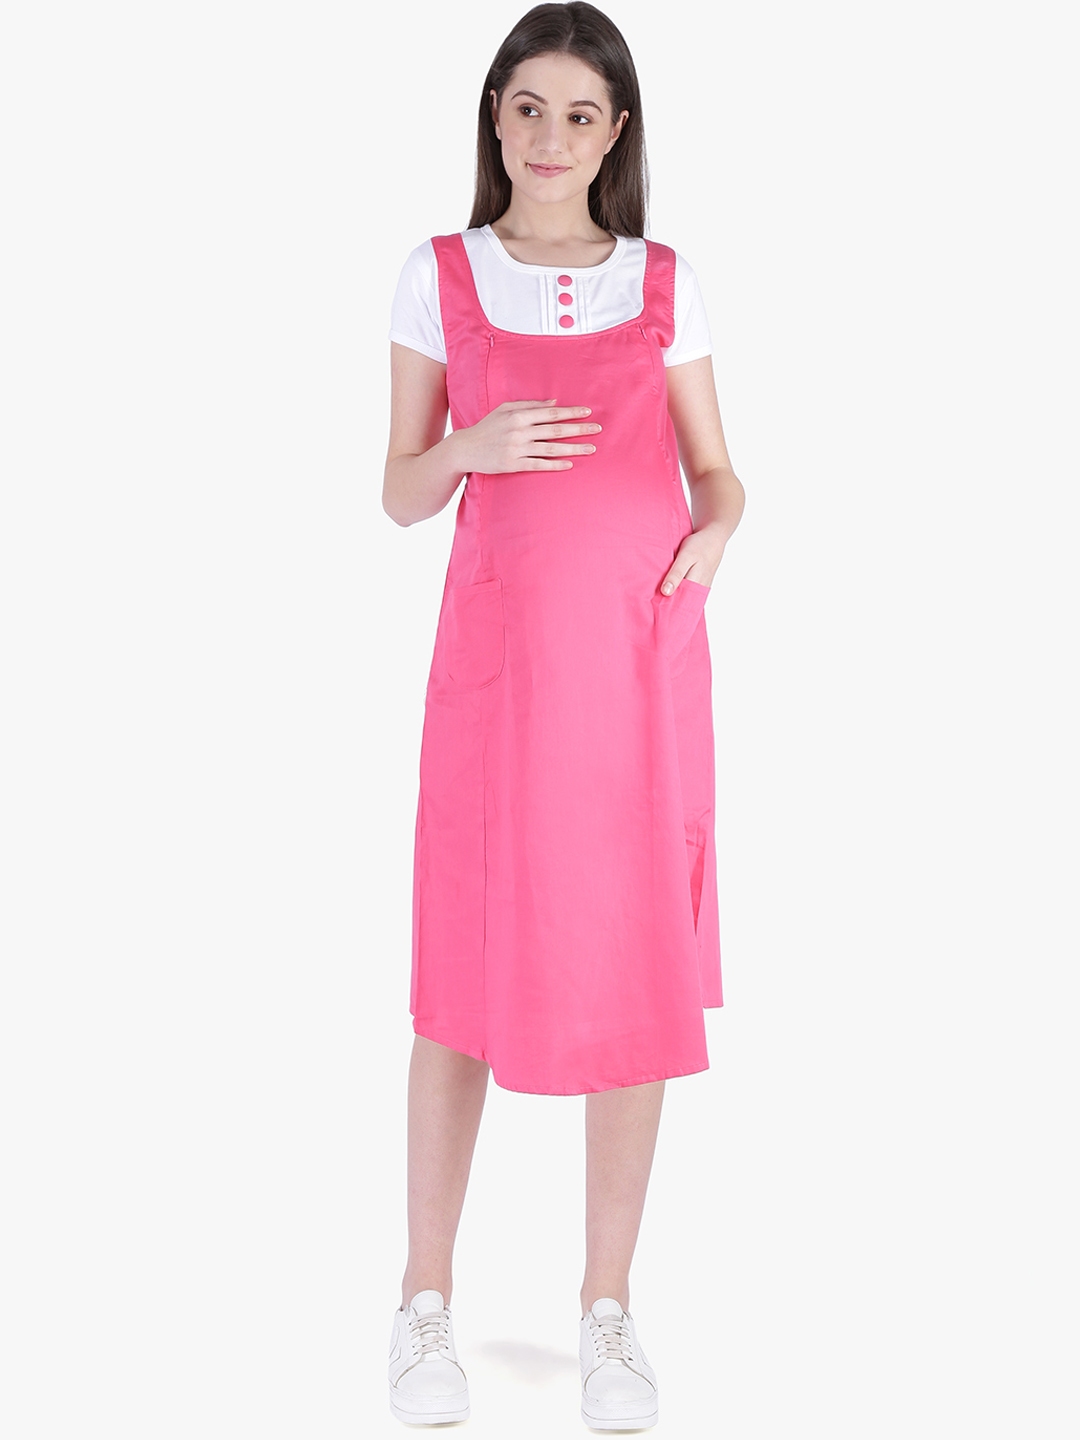 Buy Momtobe Women Solid Pink Maternity Pinafore Nursing Sustainable Dress Dresses For Women 